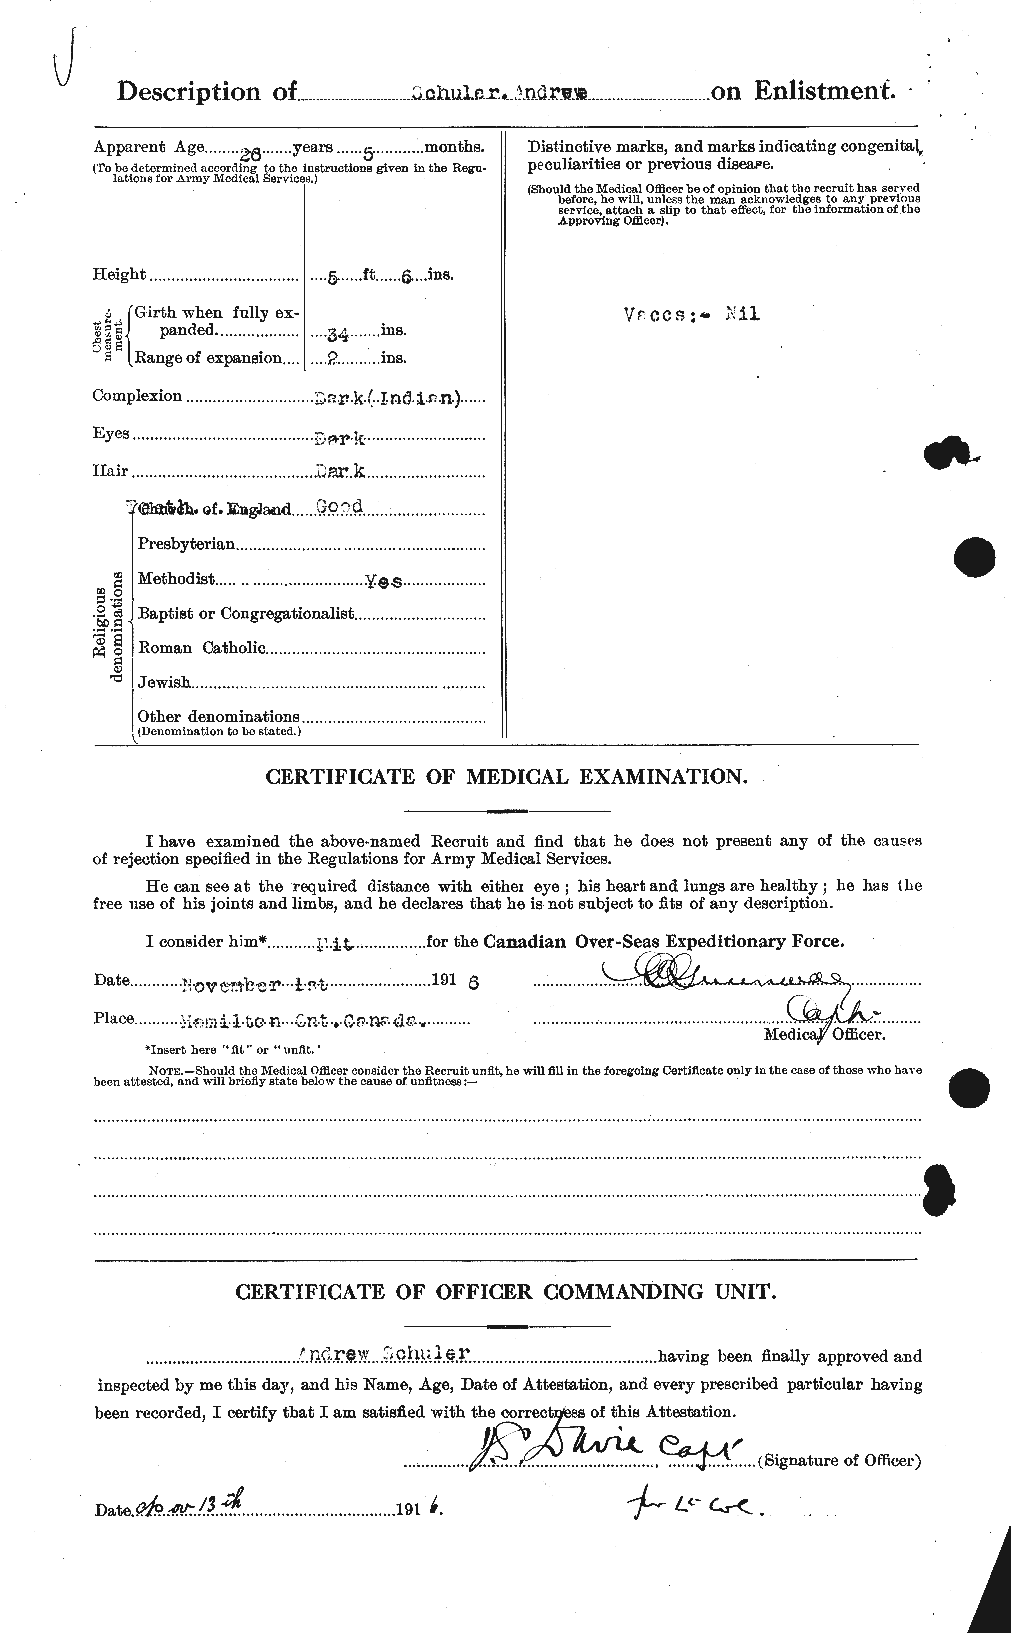 Personnel Records of the First World War - CEF 082850b